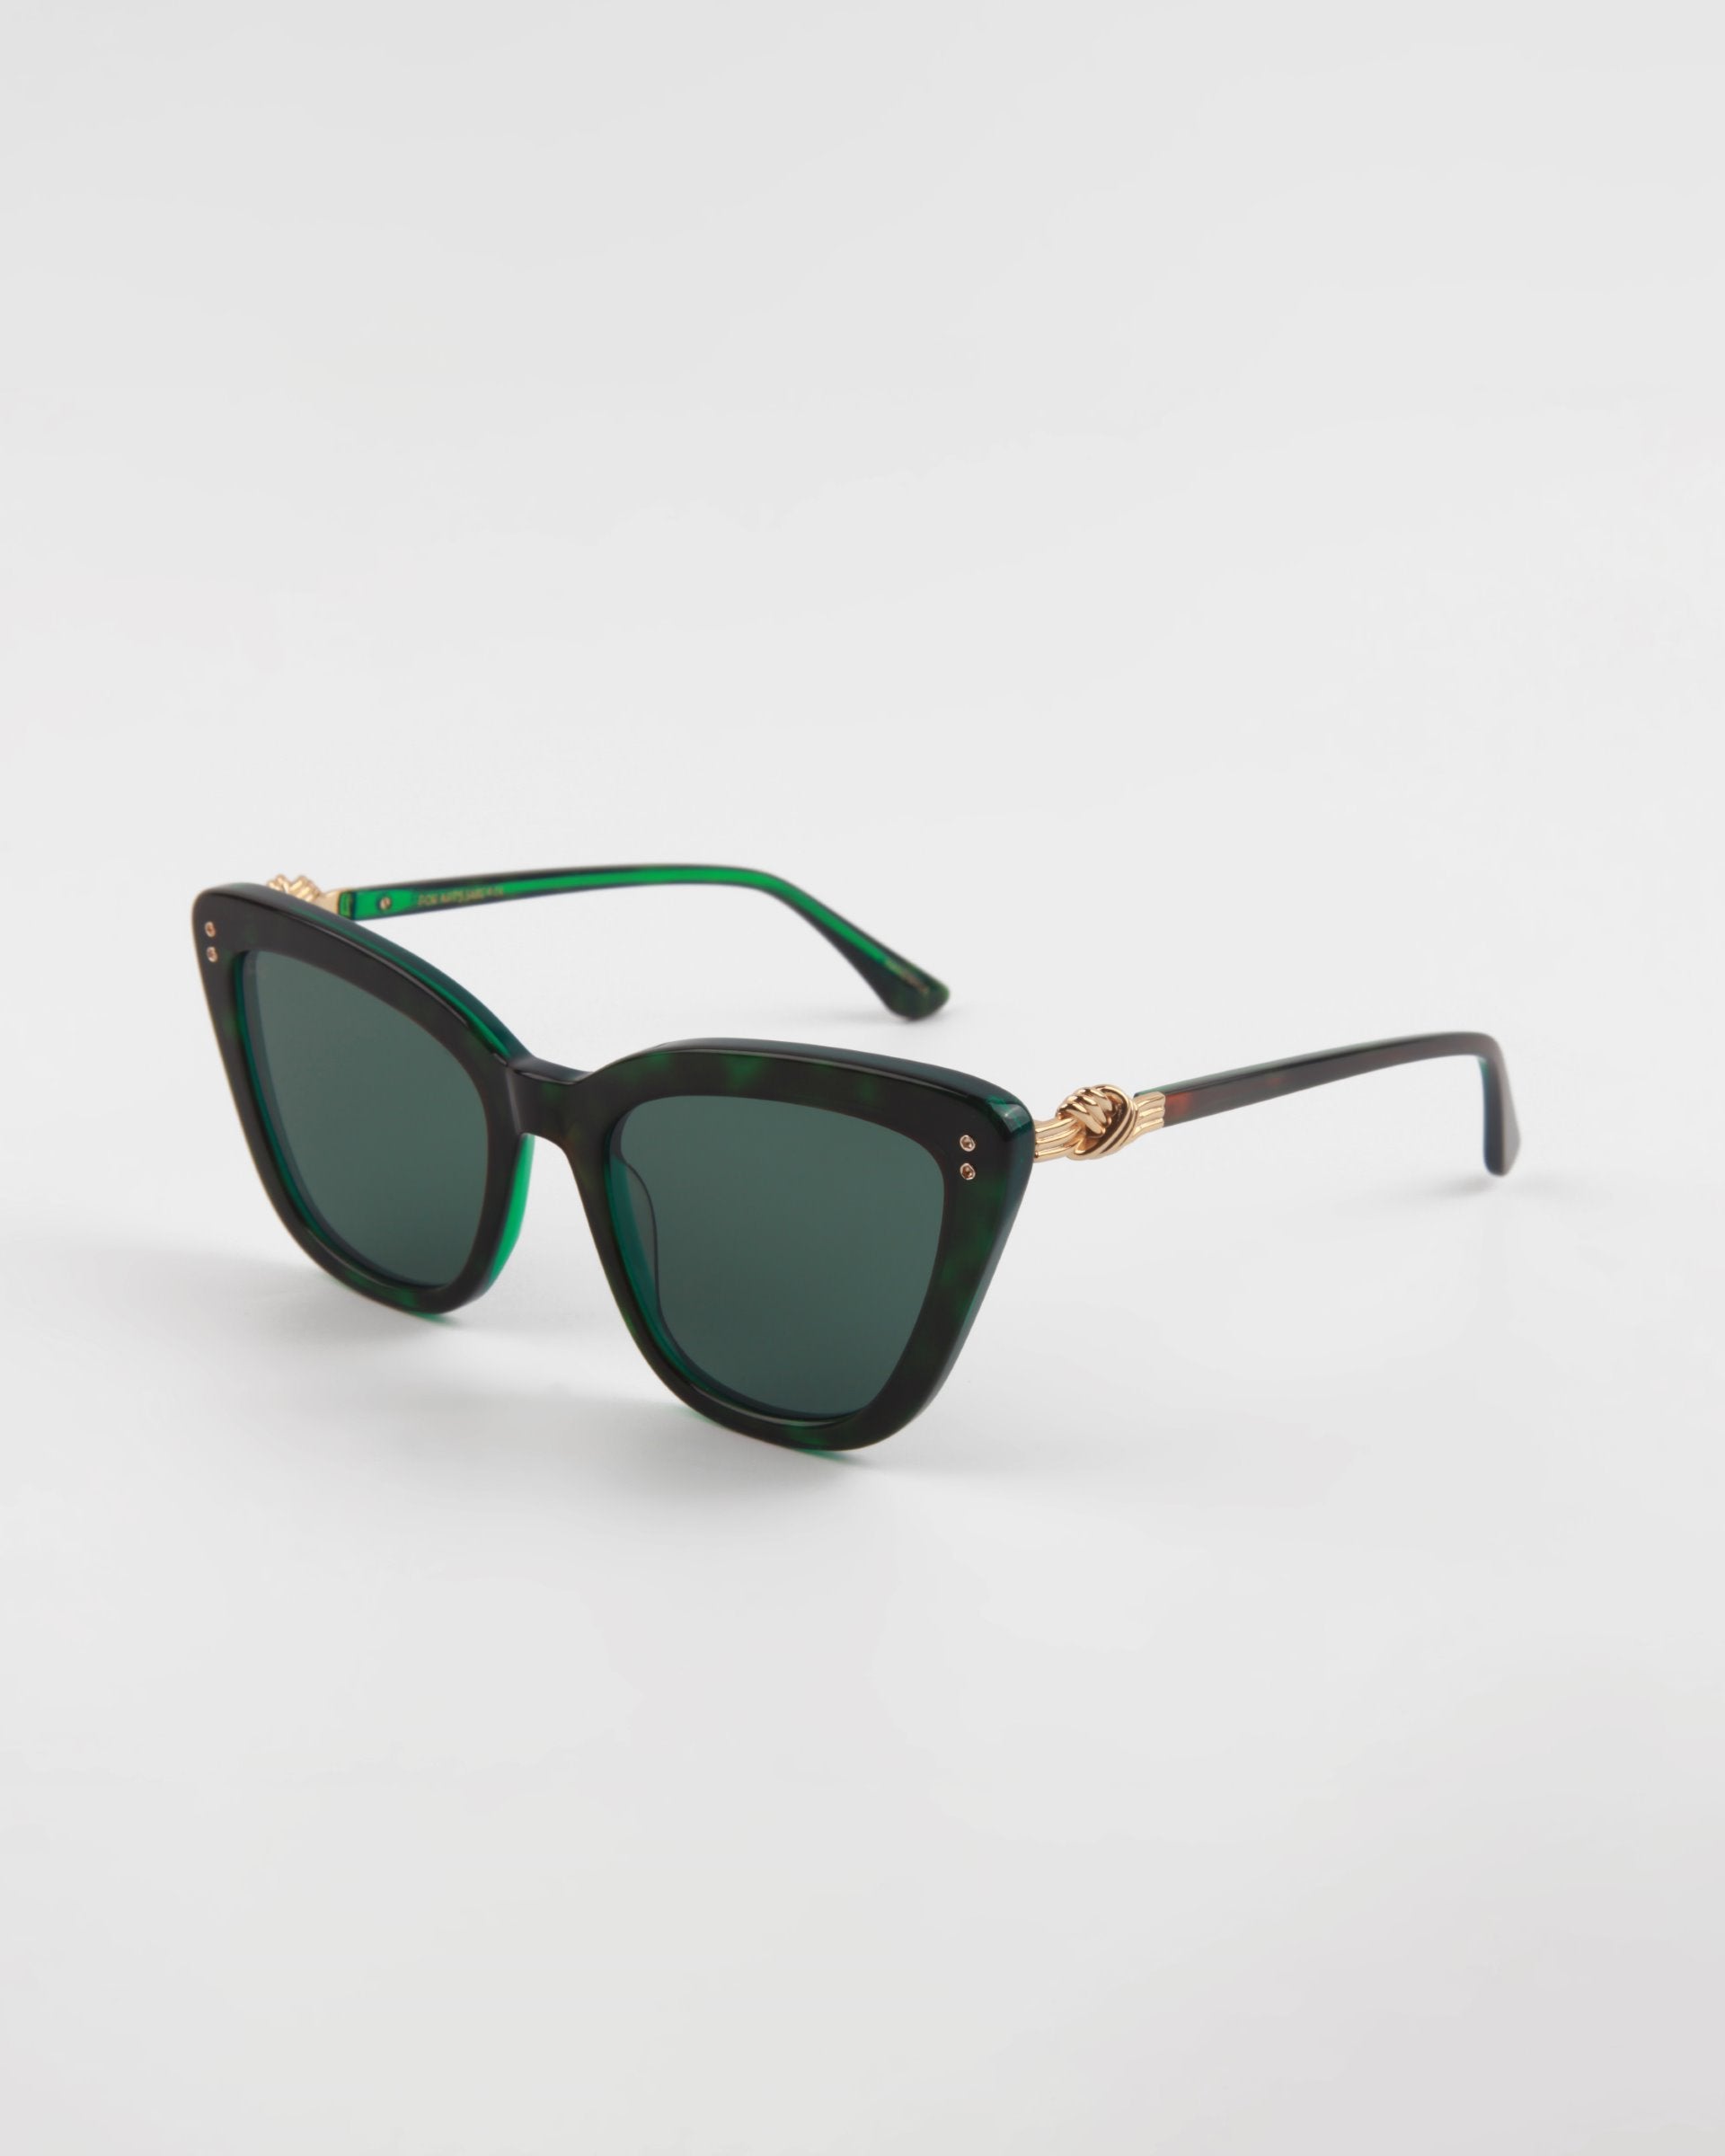 A pair of stylish, dark green cat-eye frames crafted from handmade acetate with dark tinted lenses. The arms feature a gold twist detail near the hinges, adding an elegant touch. These Ice Cream sunglasses by For Art&#39;s Sake® provide complete UVA &amp; UVB protection, ensuring both style and safety. The background is plain white.